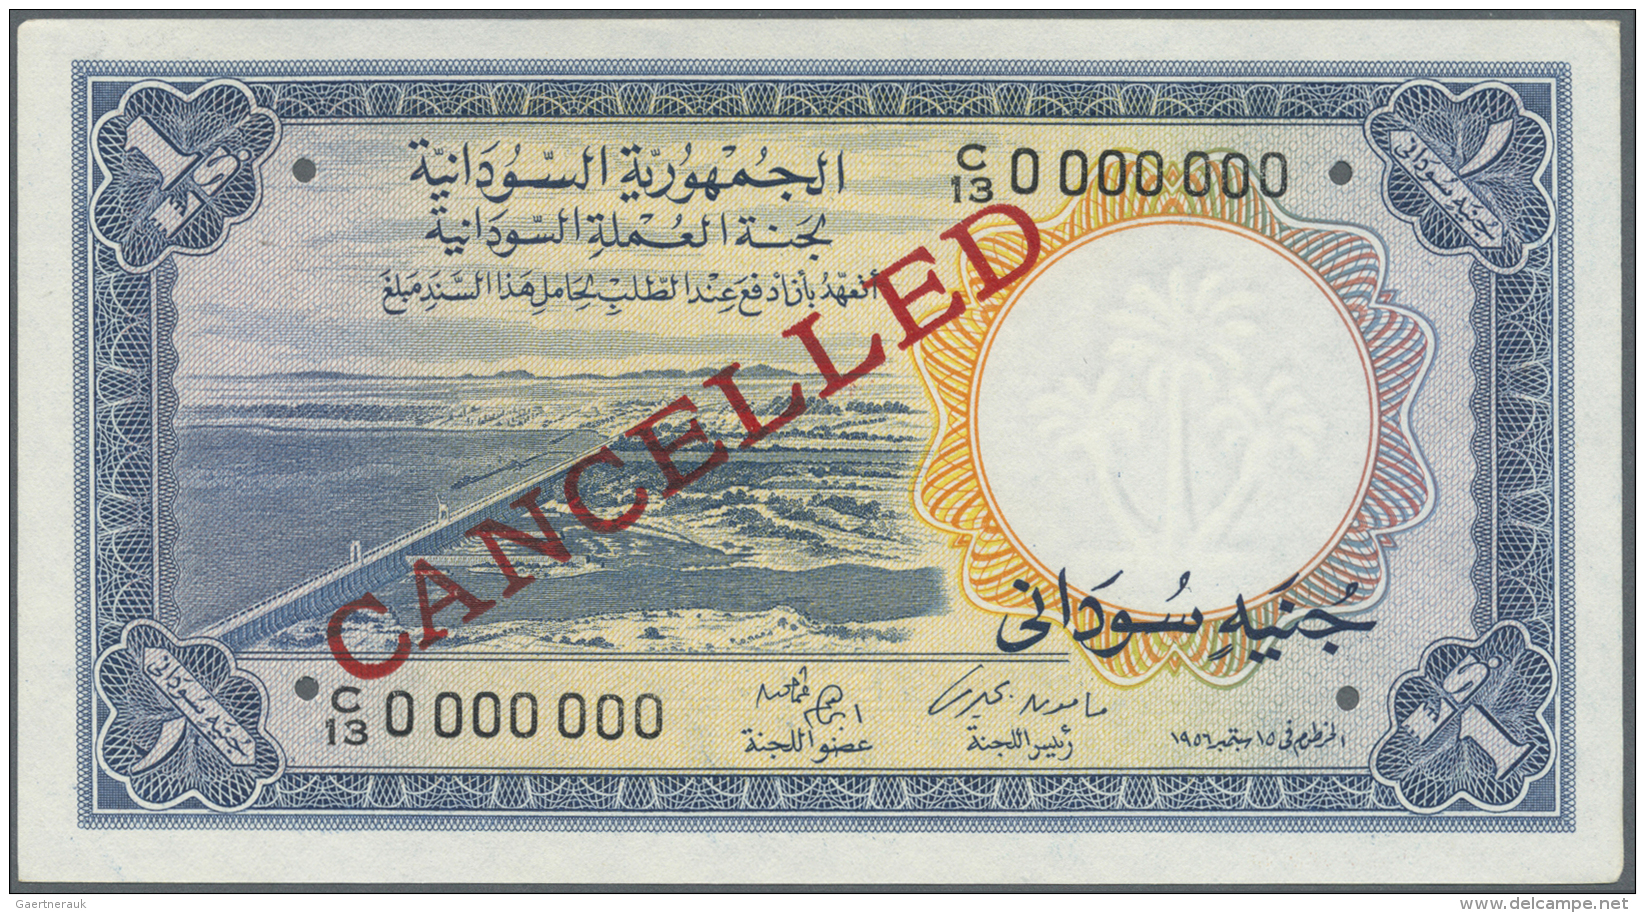 Sudan: 1 Pound 1956 Specimen P. 3s, Small Hole Cancellations, Zero Serial Numbers, Red CANCELLED Overprint, Unfolded But - Soudan